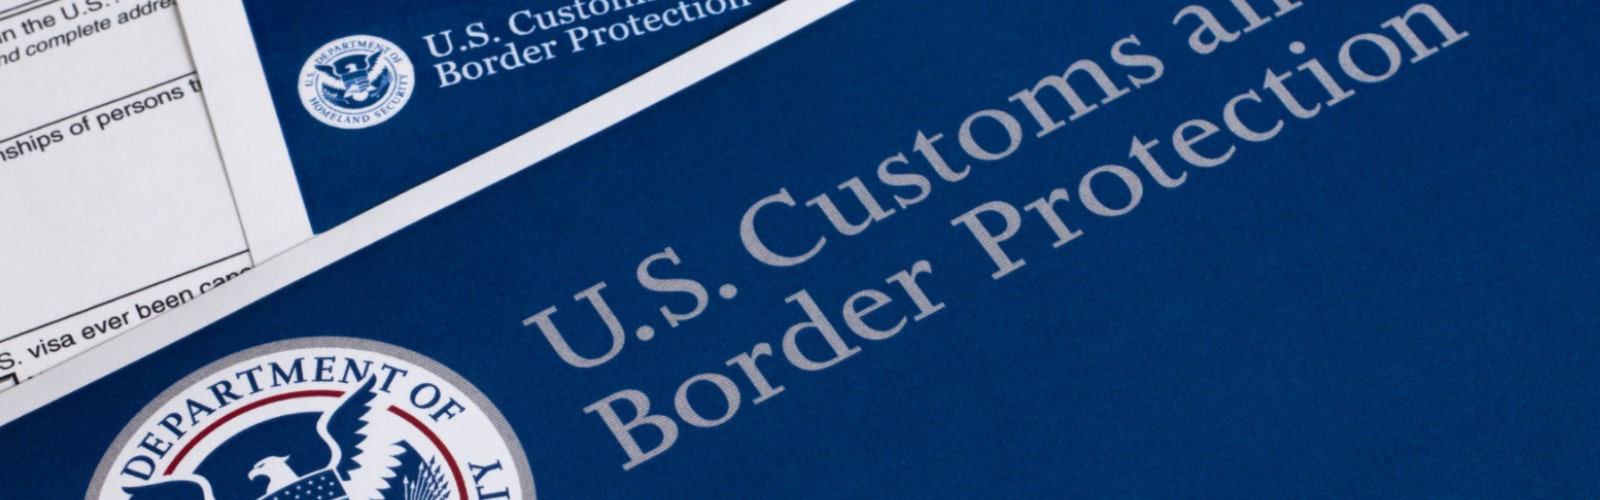 U.S. Customs and Border Protection documentation with seal of the U.S. Department of Homeland Security